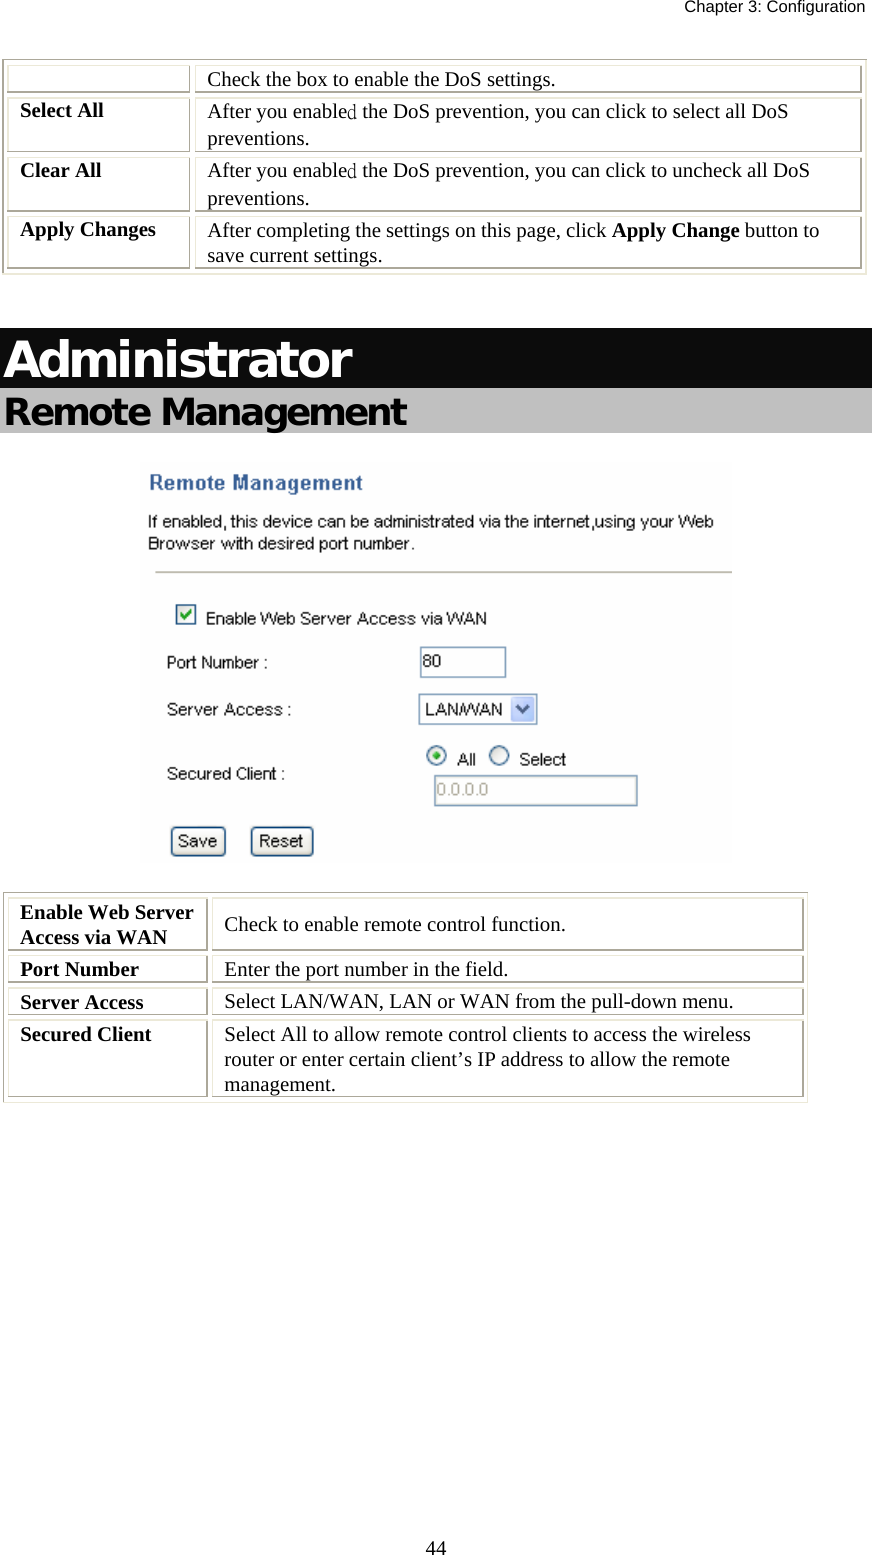   Chapter 3: Configuration  44Check the box to enable the DoS settings. Select All  After you enabled the DoS prevention, you can click to select all DoS preventions. Clear All  After you enabled the DoS prevention, you can click to uncheck all DoS preventions. Apply Changes  After completing the settings on this page, click Apply Change button to save current settings.  Administrator Remote Management  Enable Web Server Access via WAN  Check to enable remote control function. Port Number  Enter the port number in the field.   Server Access  Select LAN/WAN, LAN or WAN from the pull-down menu.  Secured Client  Select All to allow remote control clients to access the wireless router or enter certain client’s IP address to allow the remote management.  